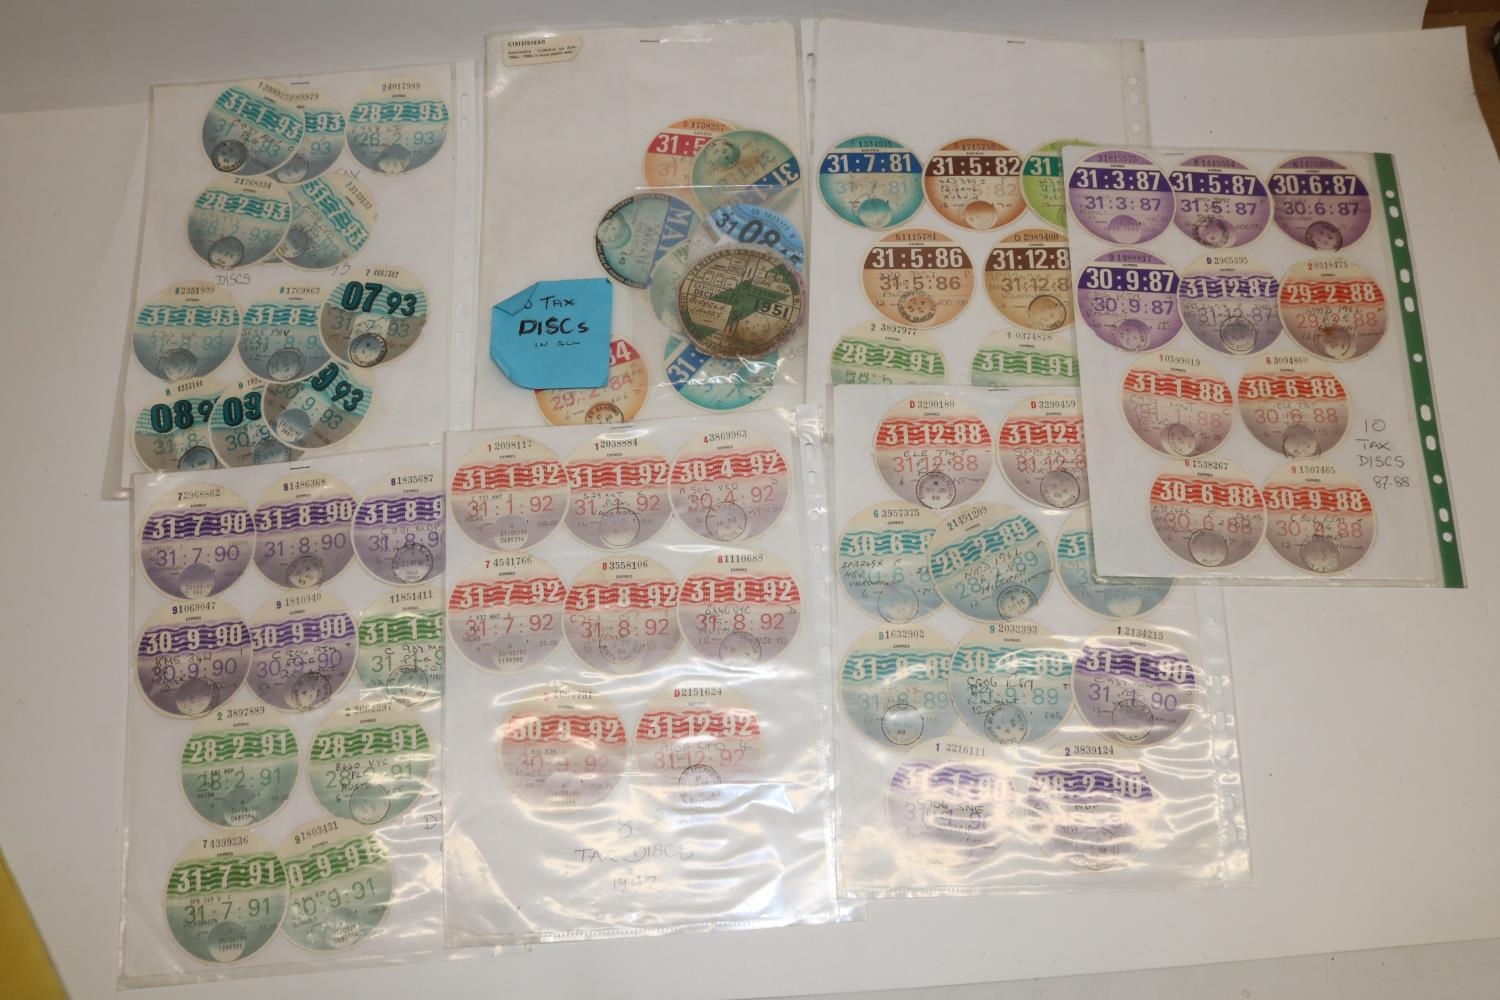 Collection of assorted Tax Discs (approx. 70)